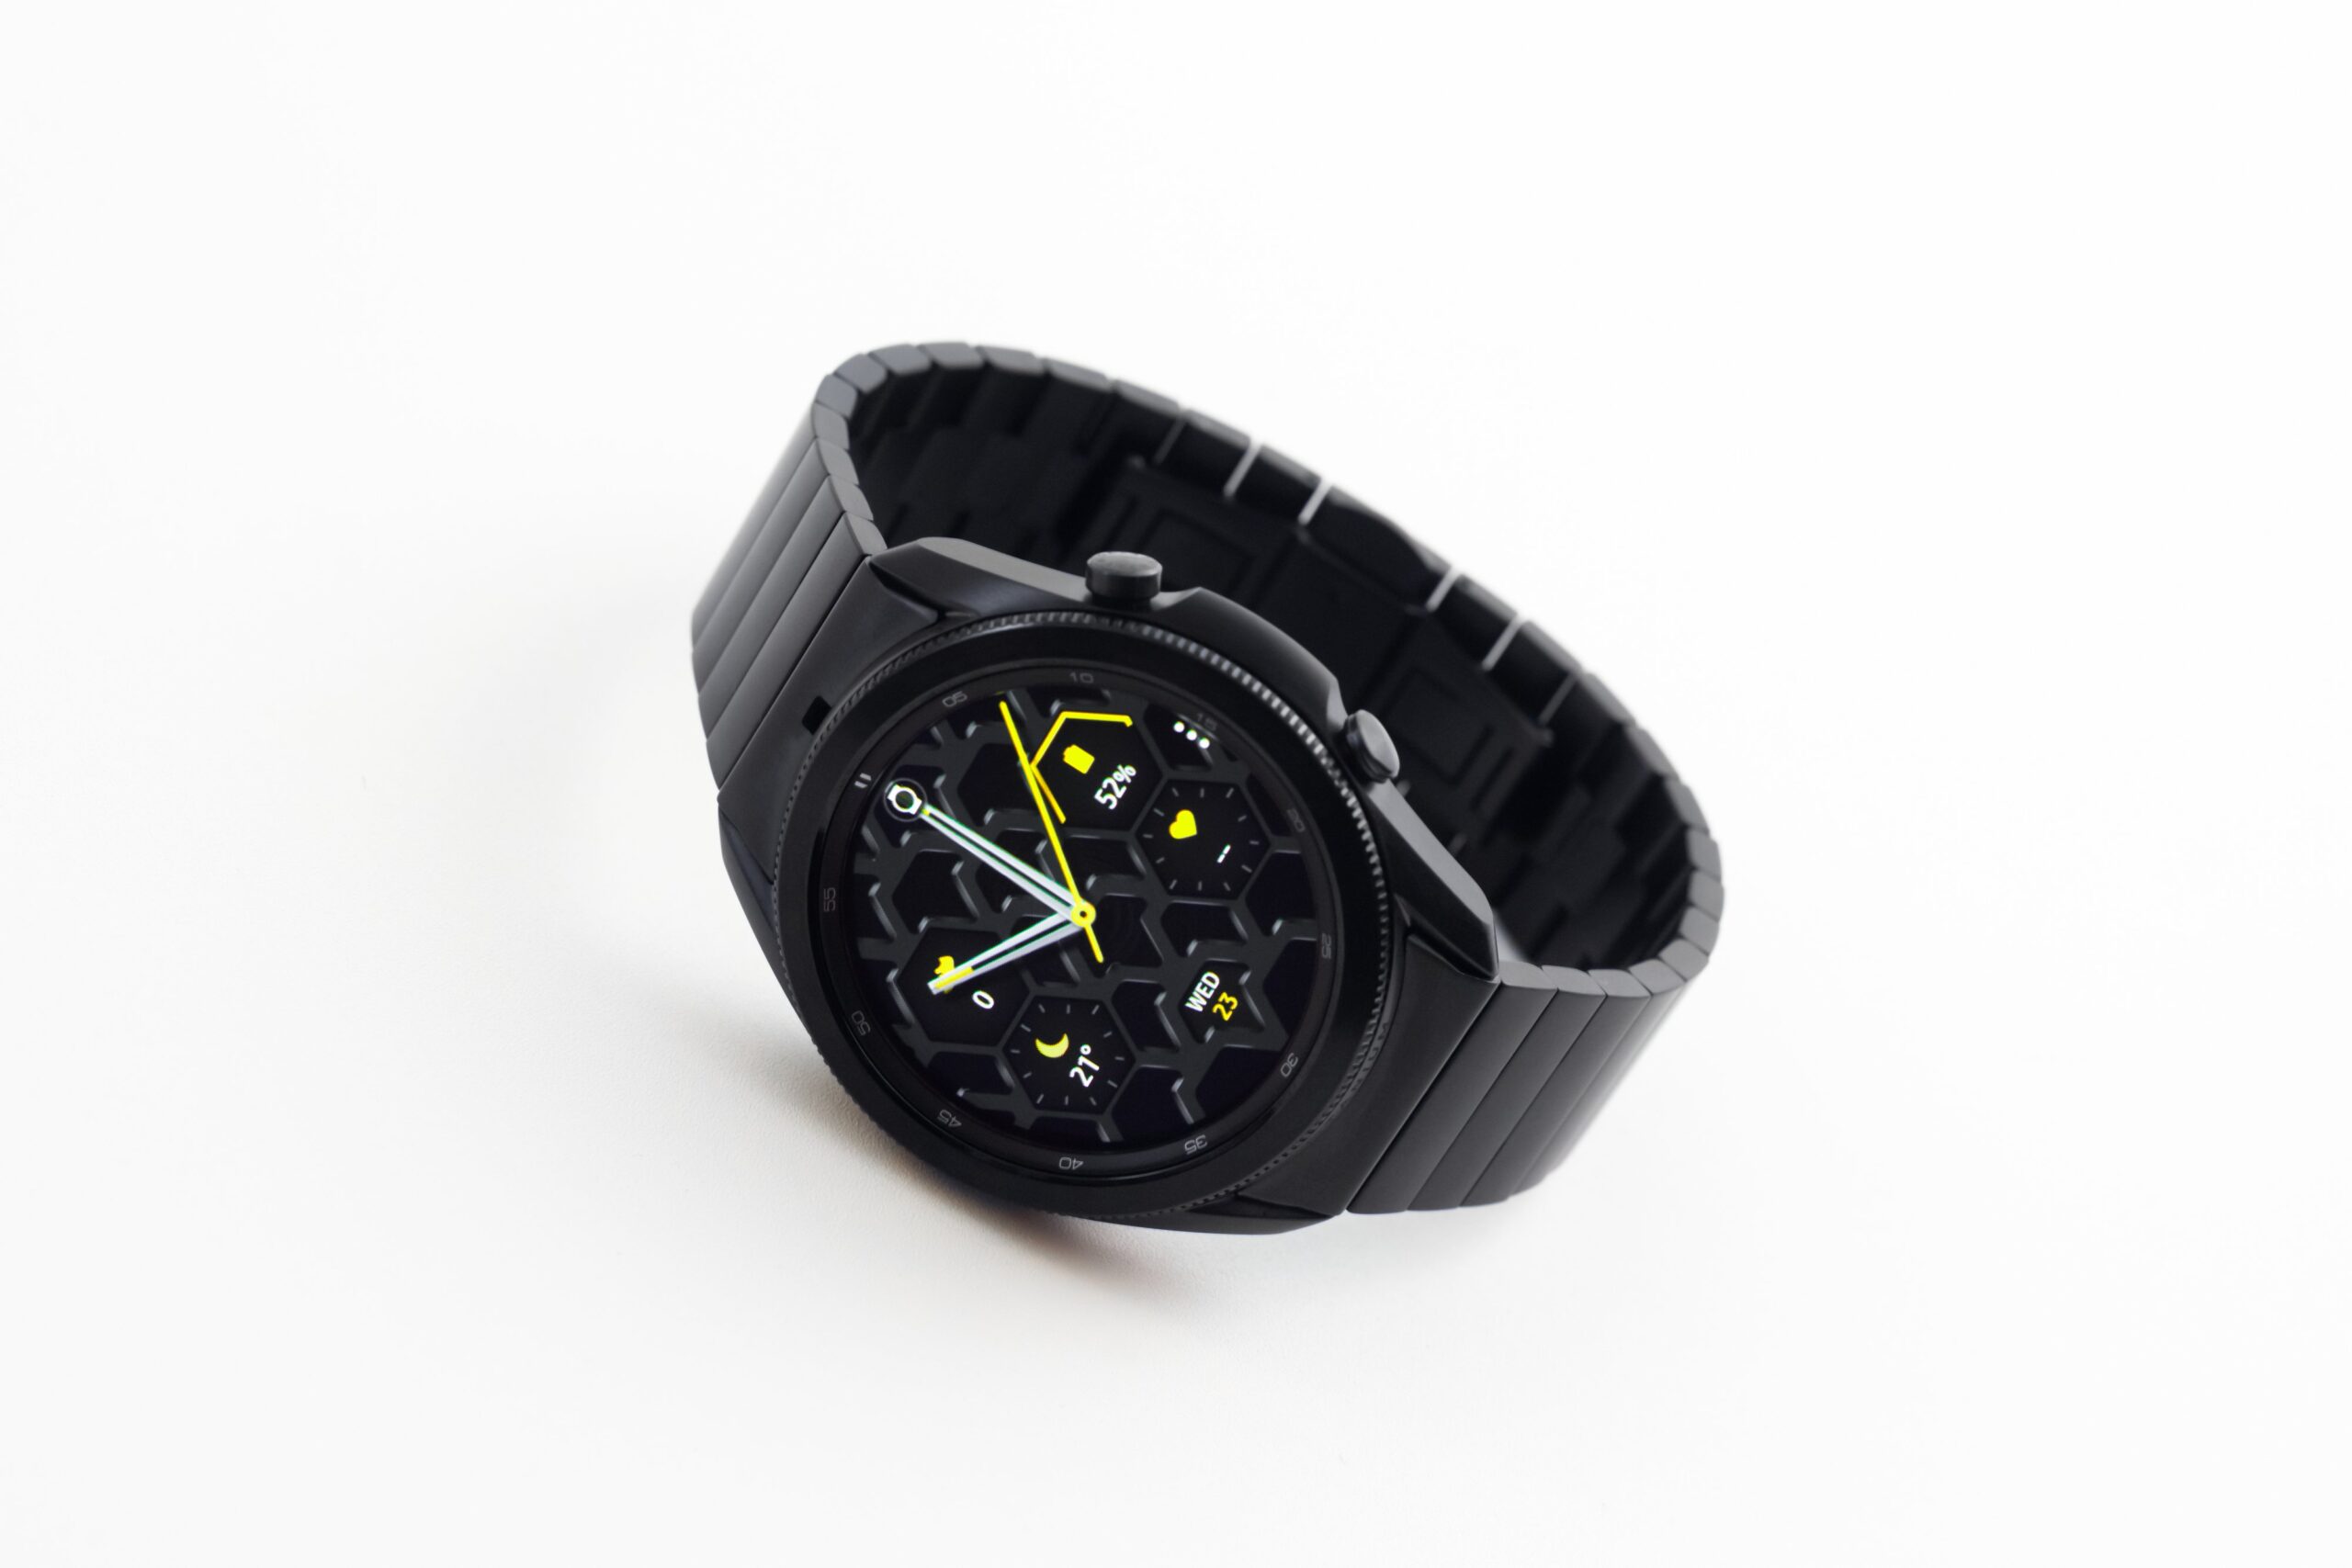 Samsung Galaxy Watch4 and Galaxy Watch Active4 could come in two sizes and cellular variant